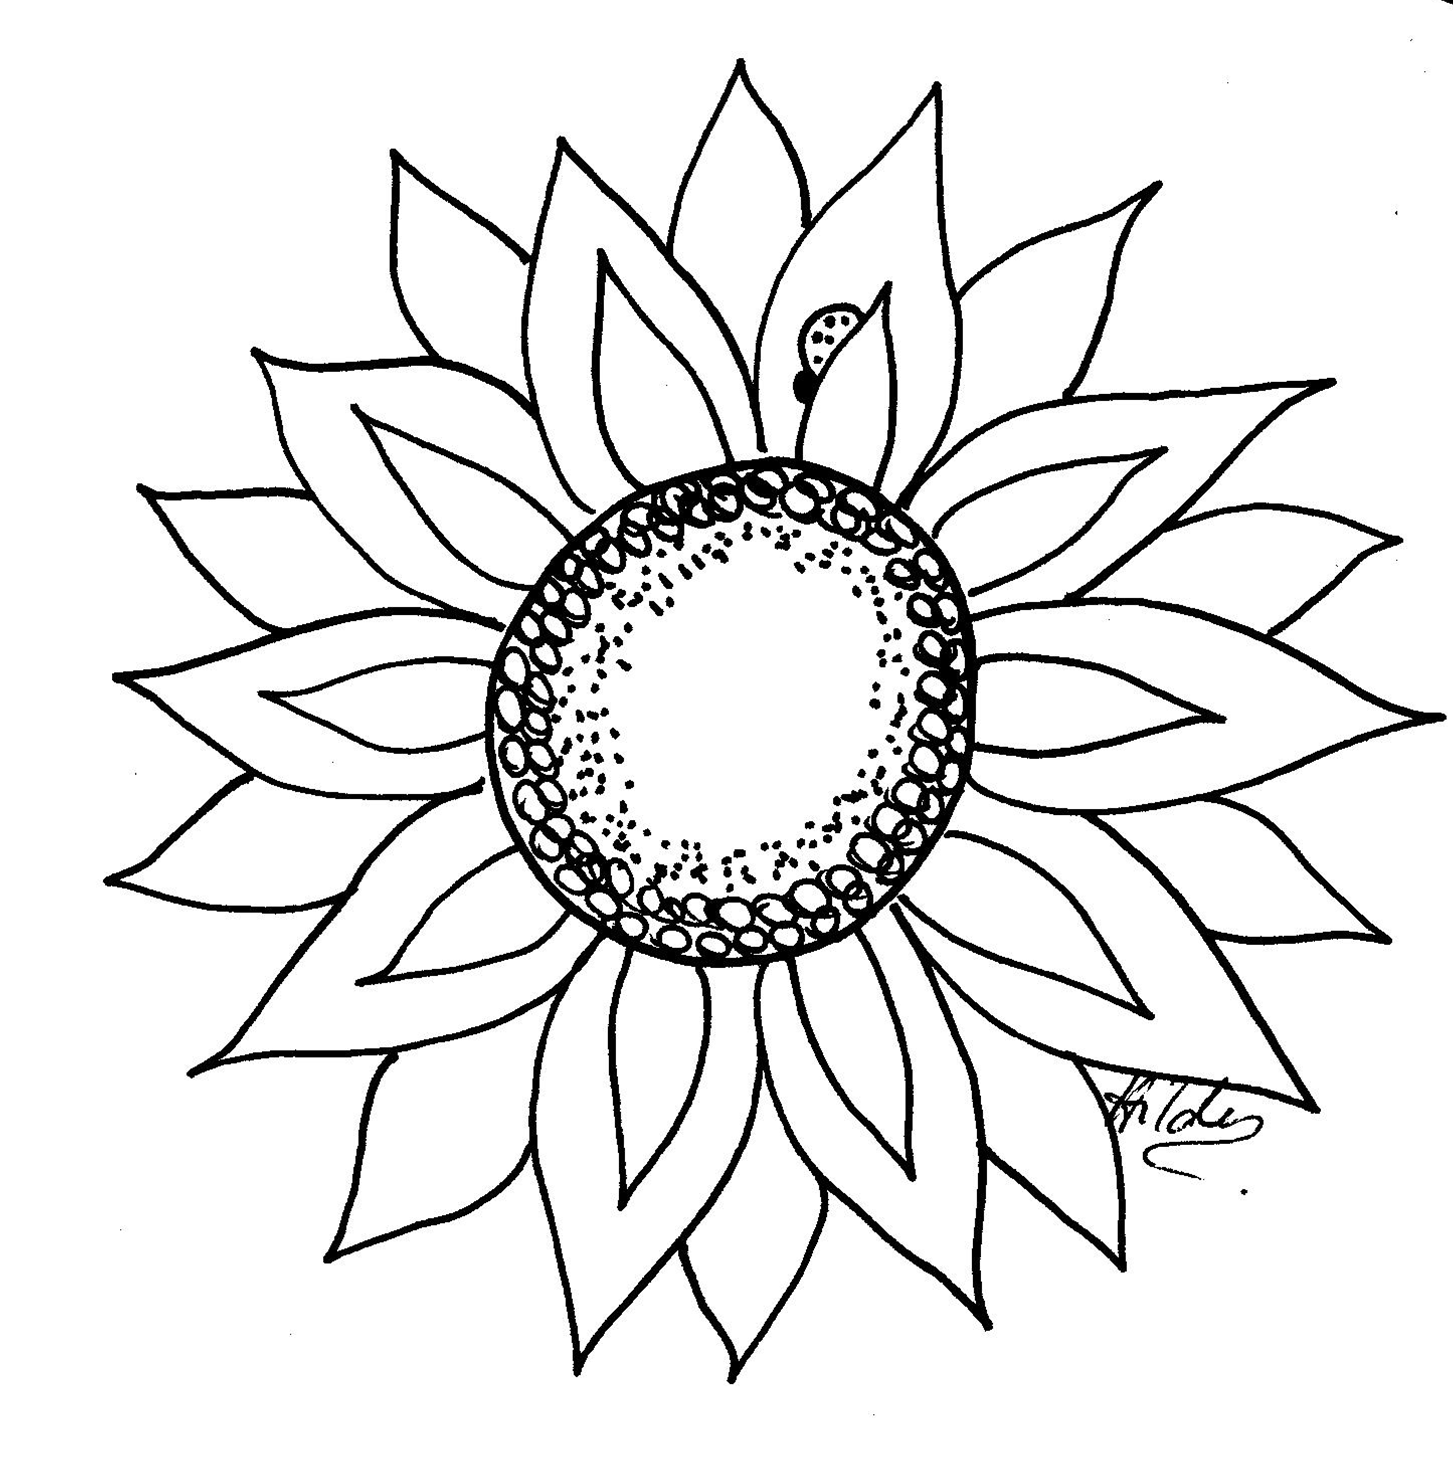 outline sunflower tattoo drawing, line drawing outline sunflower tattoo  drawing, stencil sunflower tattoo outline, drawings stencil sunflower  tattoo outline, stencil sunflower outline, outline sunflower drawing easy,  - MasterBundles